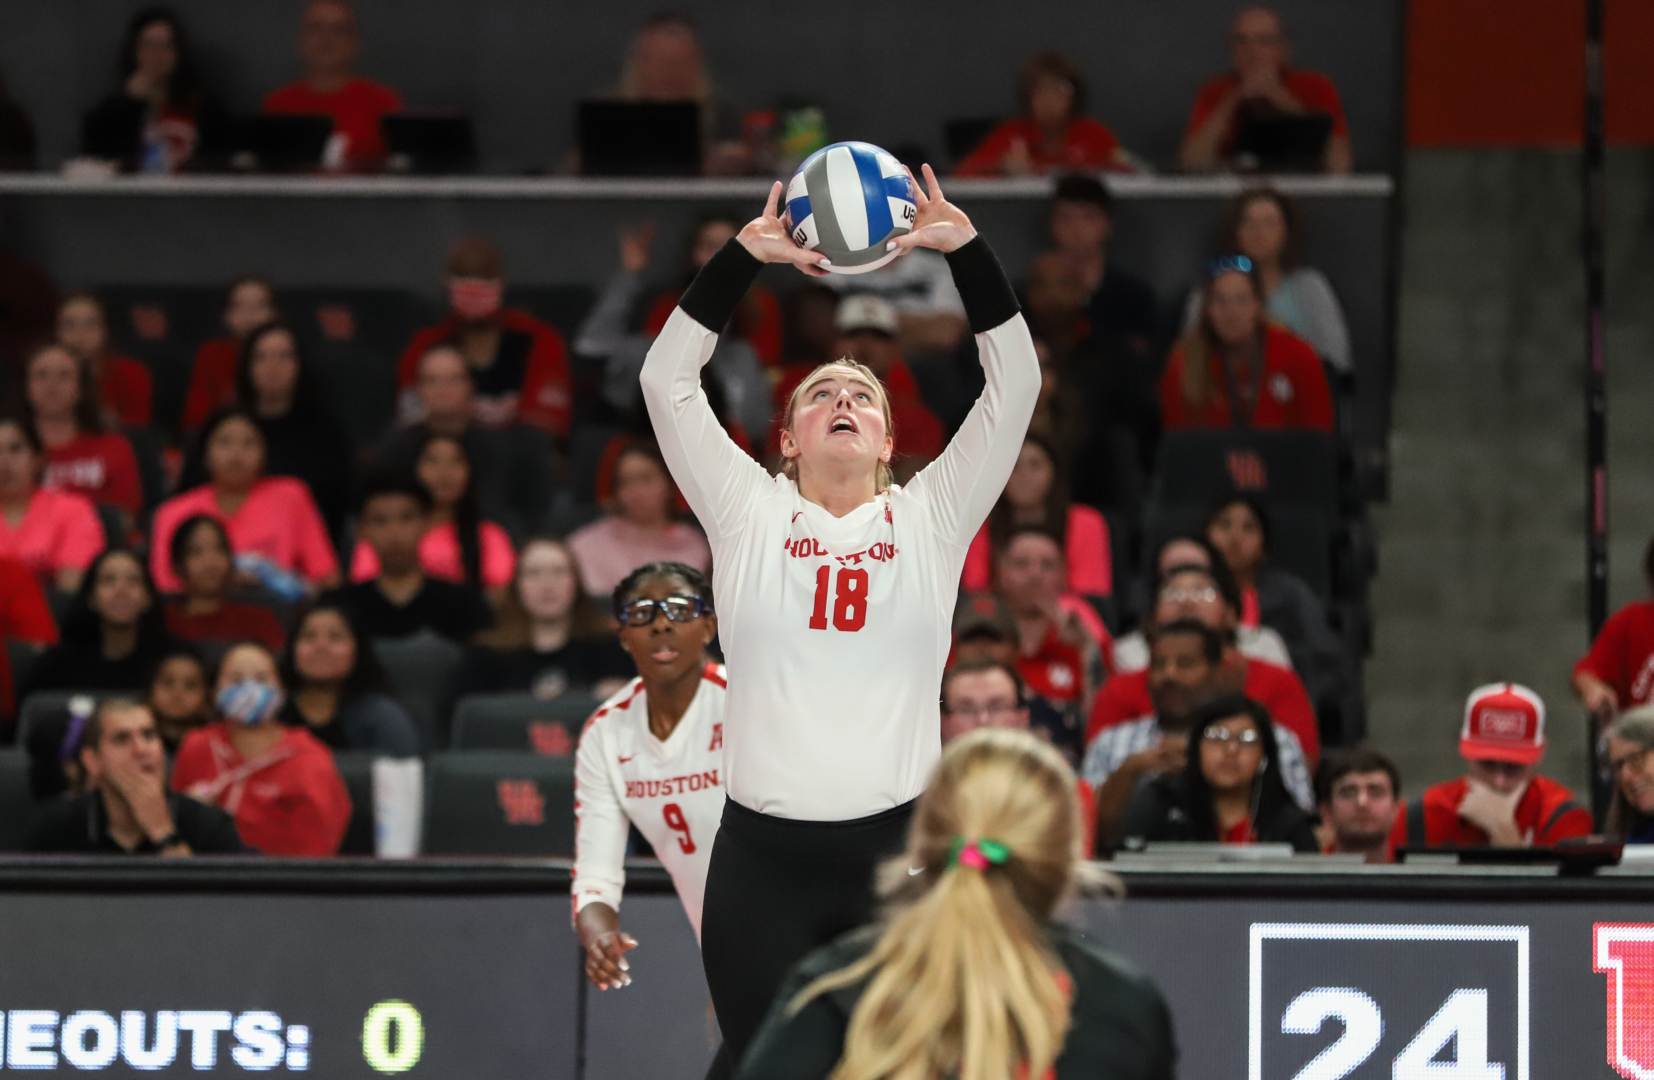 UH volleyball improved to a perfect 8-0 in AAC play with its win over Memphis on Sunday. | Sean Thomas/The Cougar